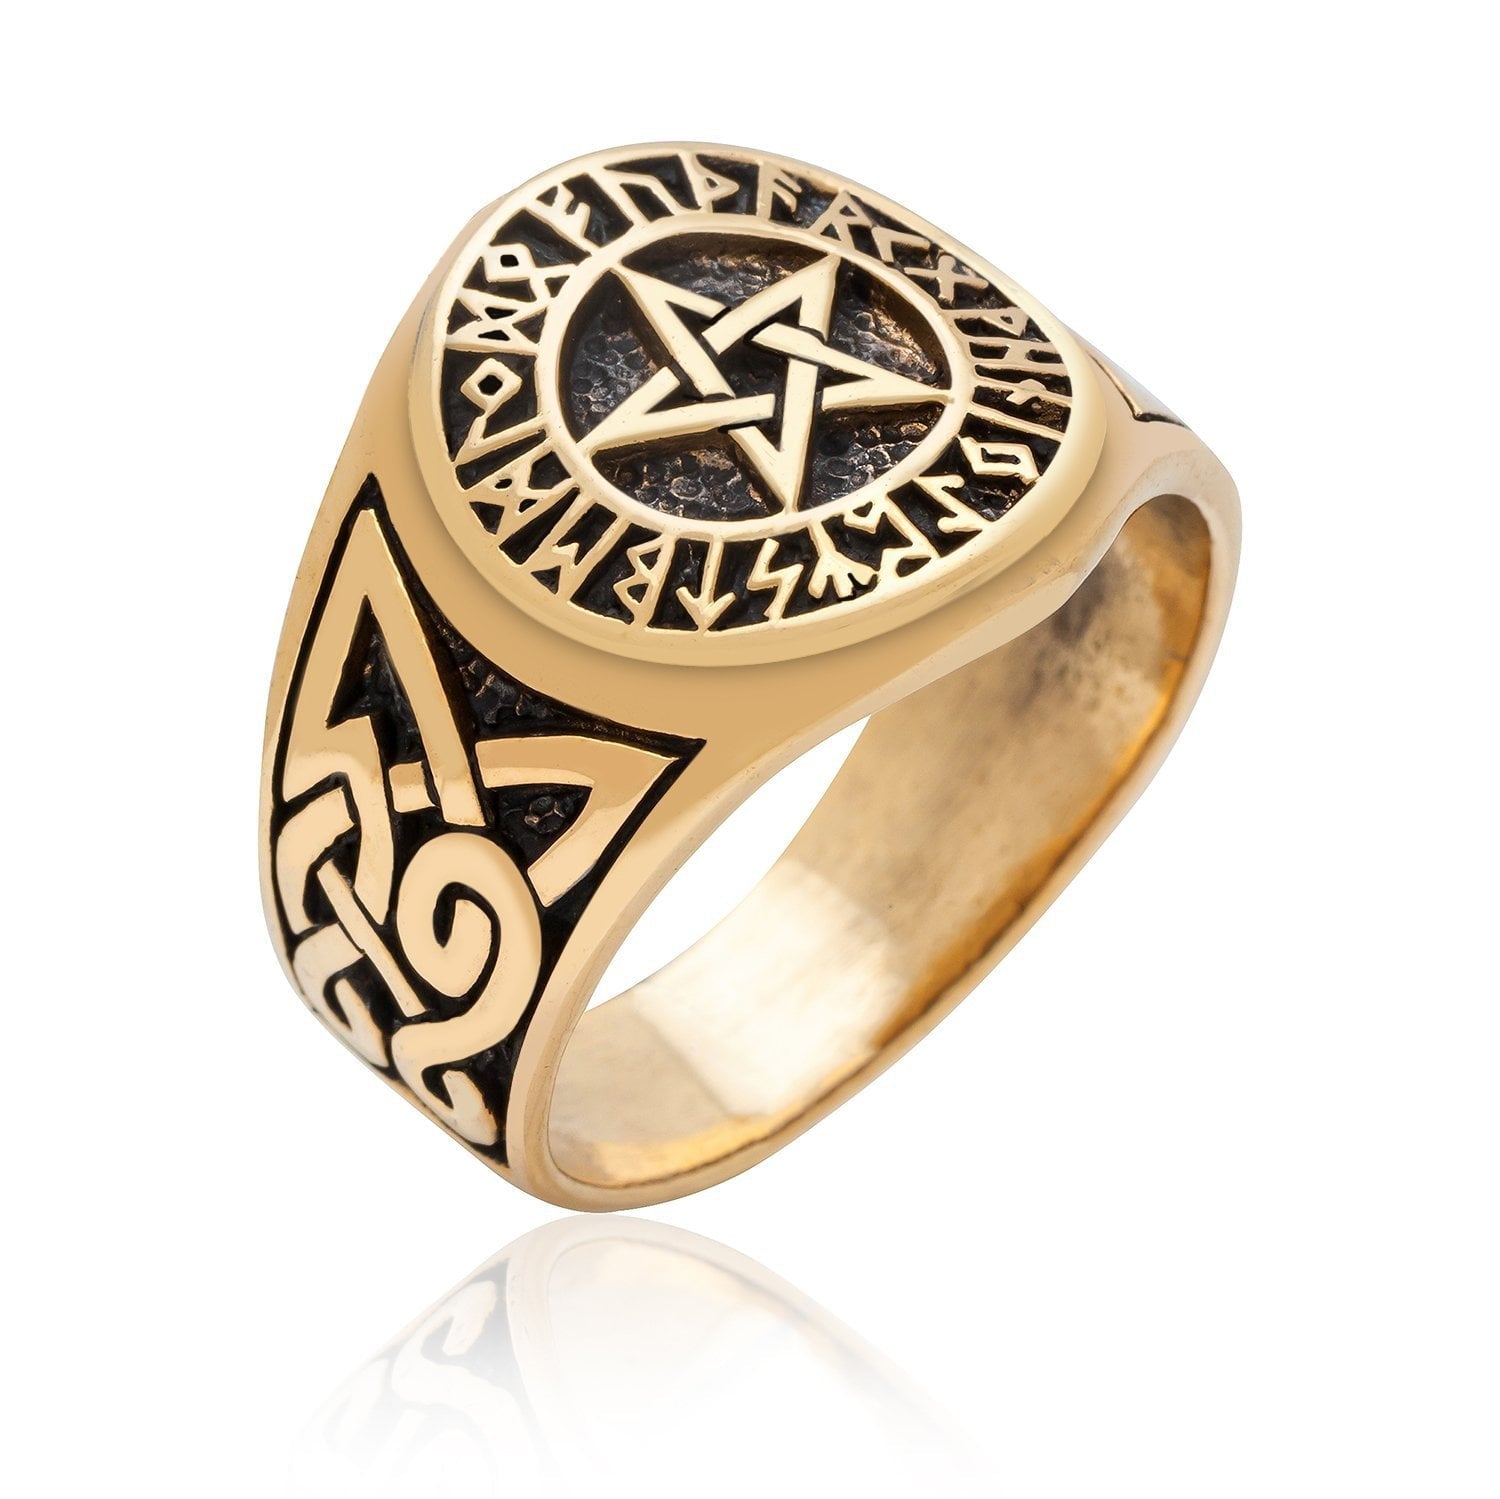 Pentagram Bronze Ring with Knotwork and Viking Runes - SilverMania925